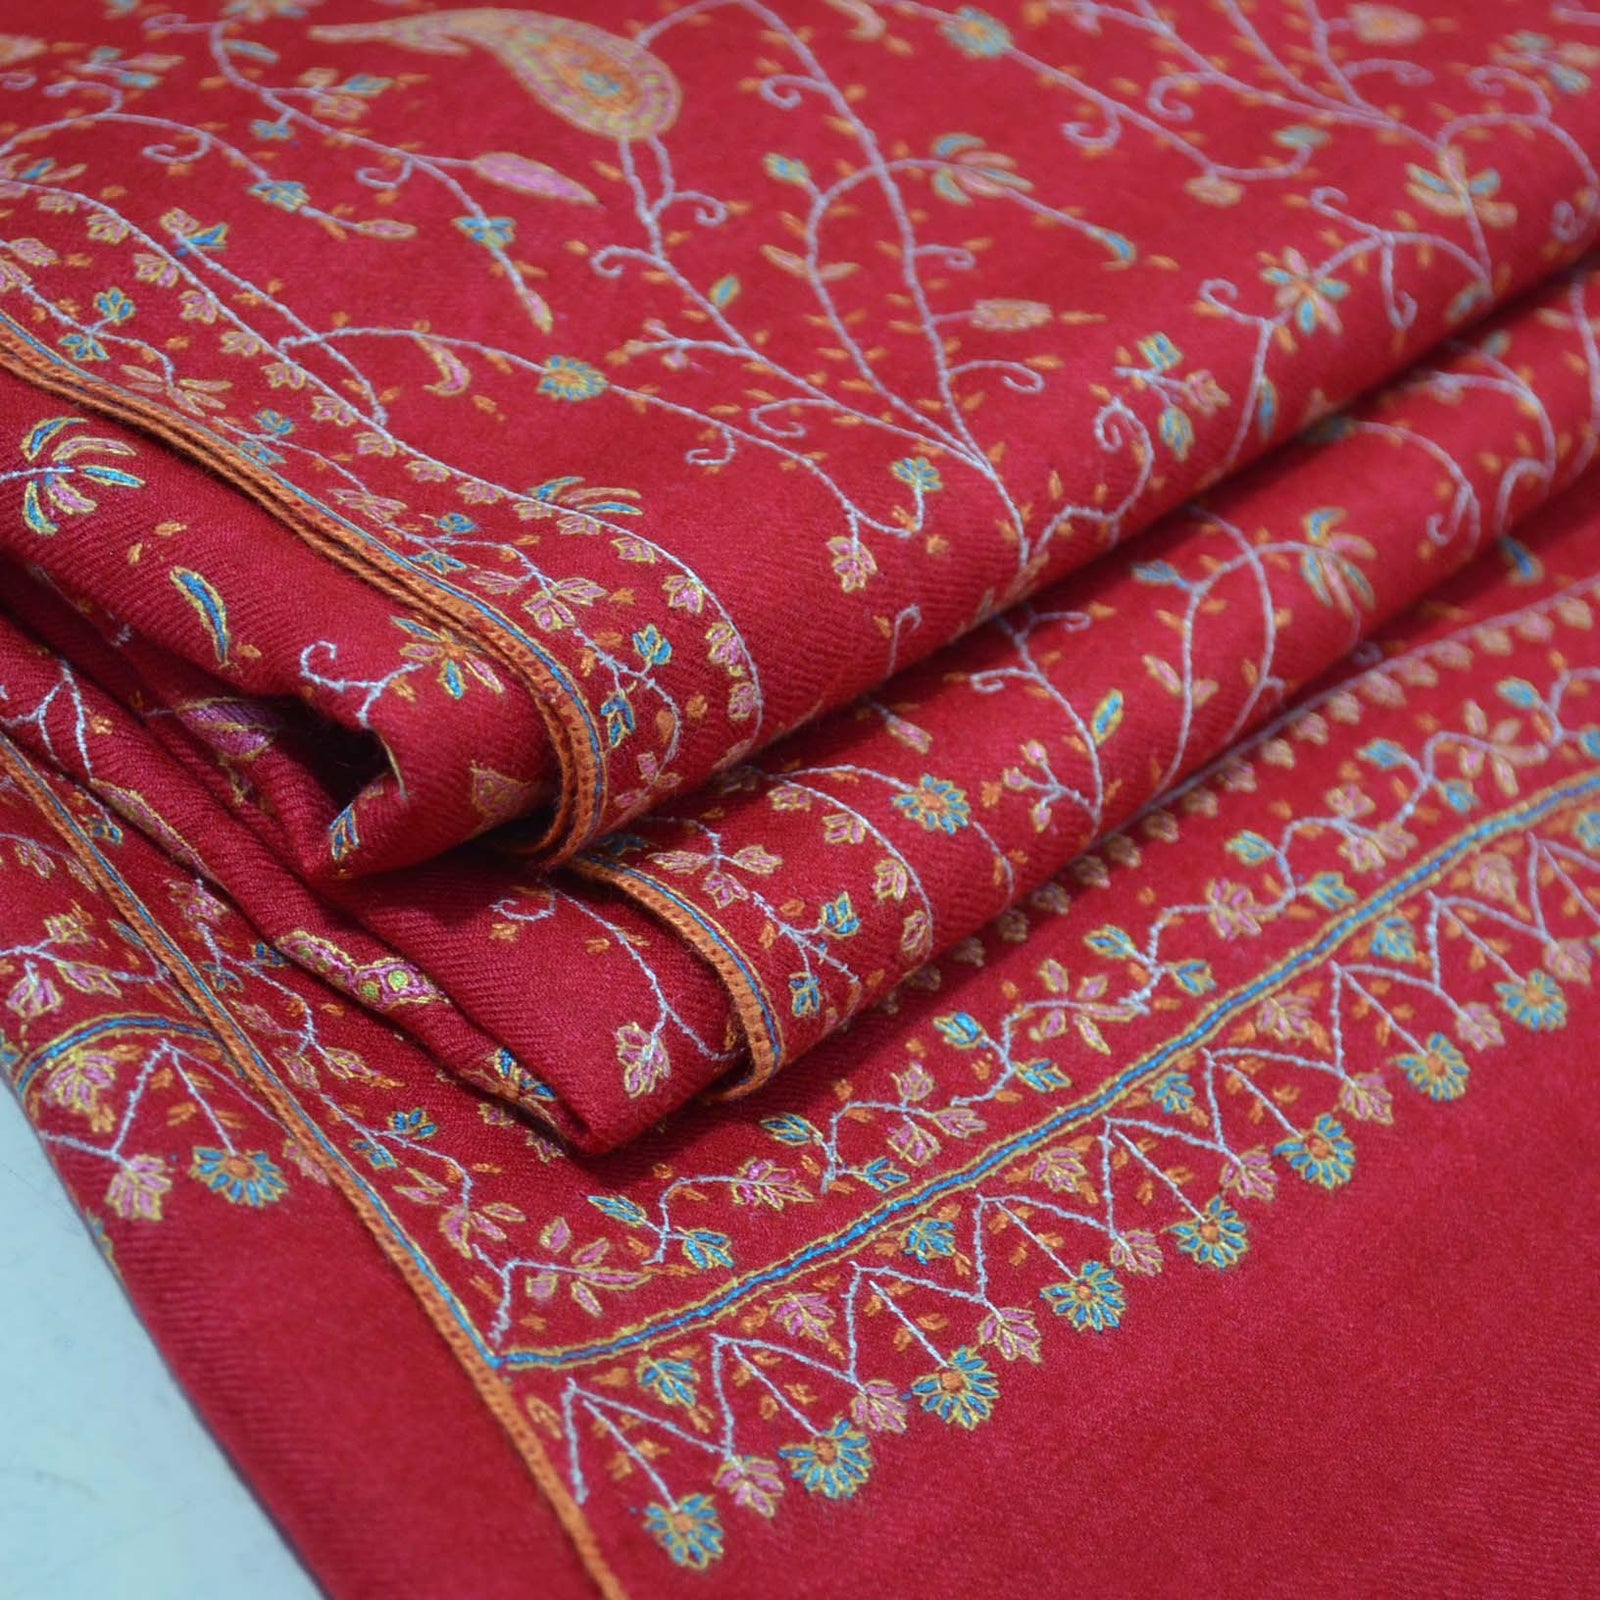 Best quality fiber, "Pashmina" with beautiful embroidery all over the shawl